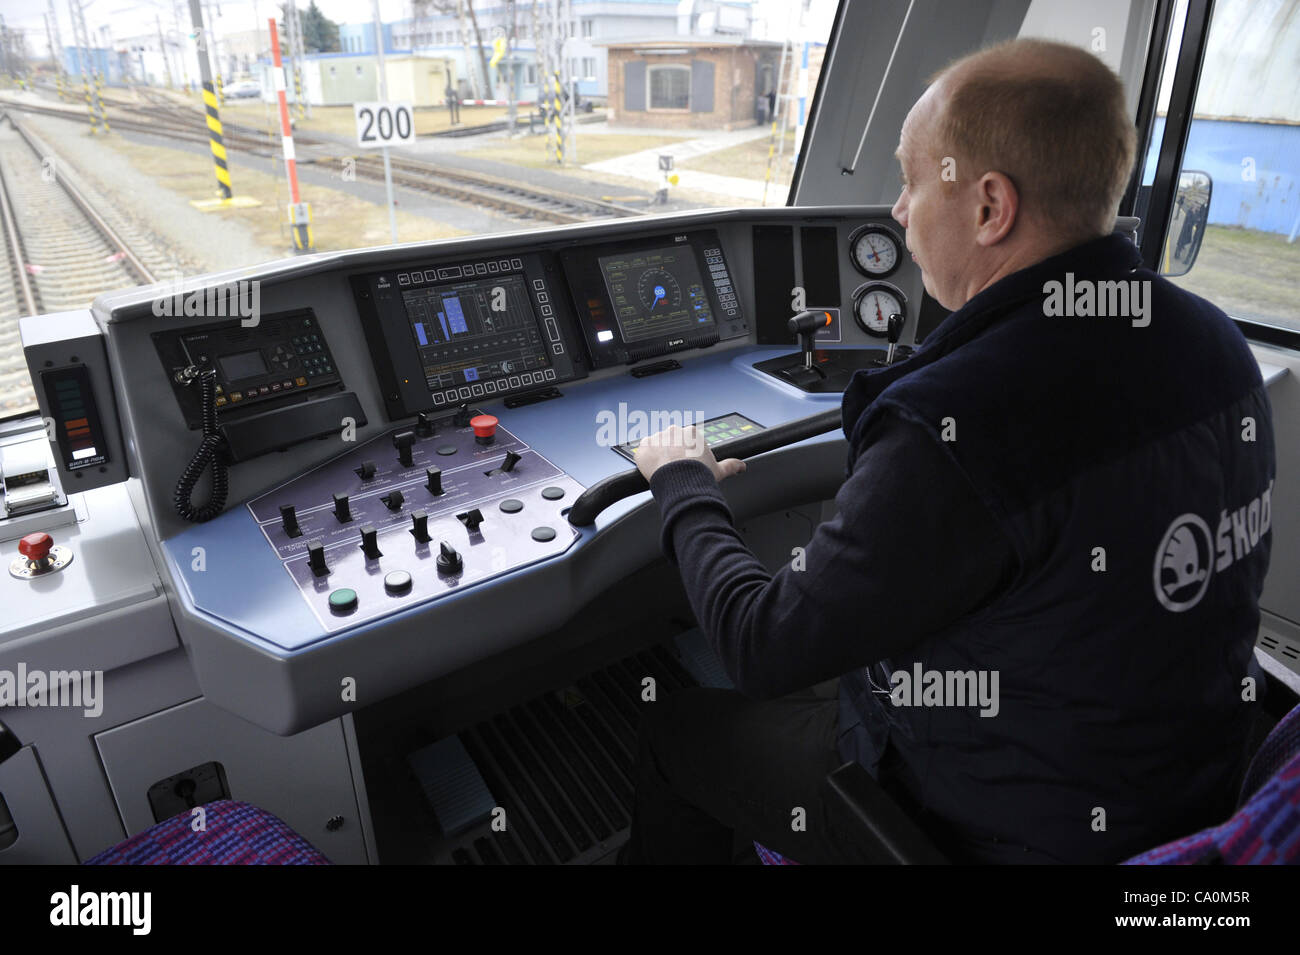 Electric double deck unit EJ675 is designated for inter-regional traffic primarily in Ukraine and will transport soccer fans during Euro 2012. Czech Republic, March 13, 2012 (CTK Photo/Petr Eret) Stock Photo